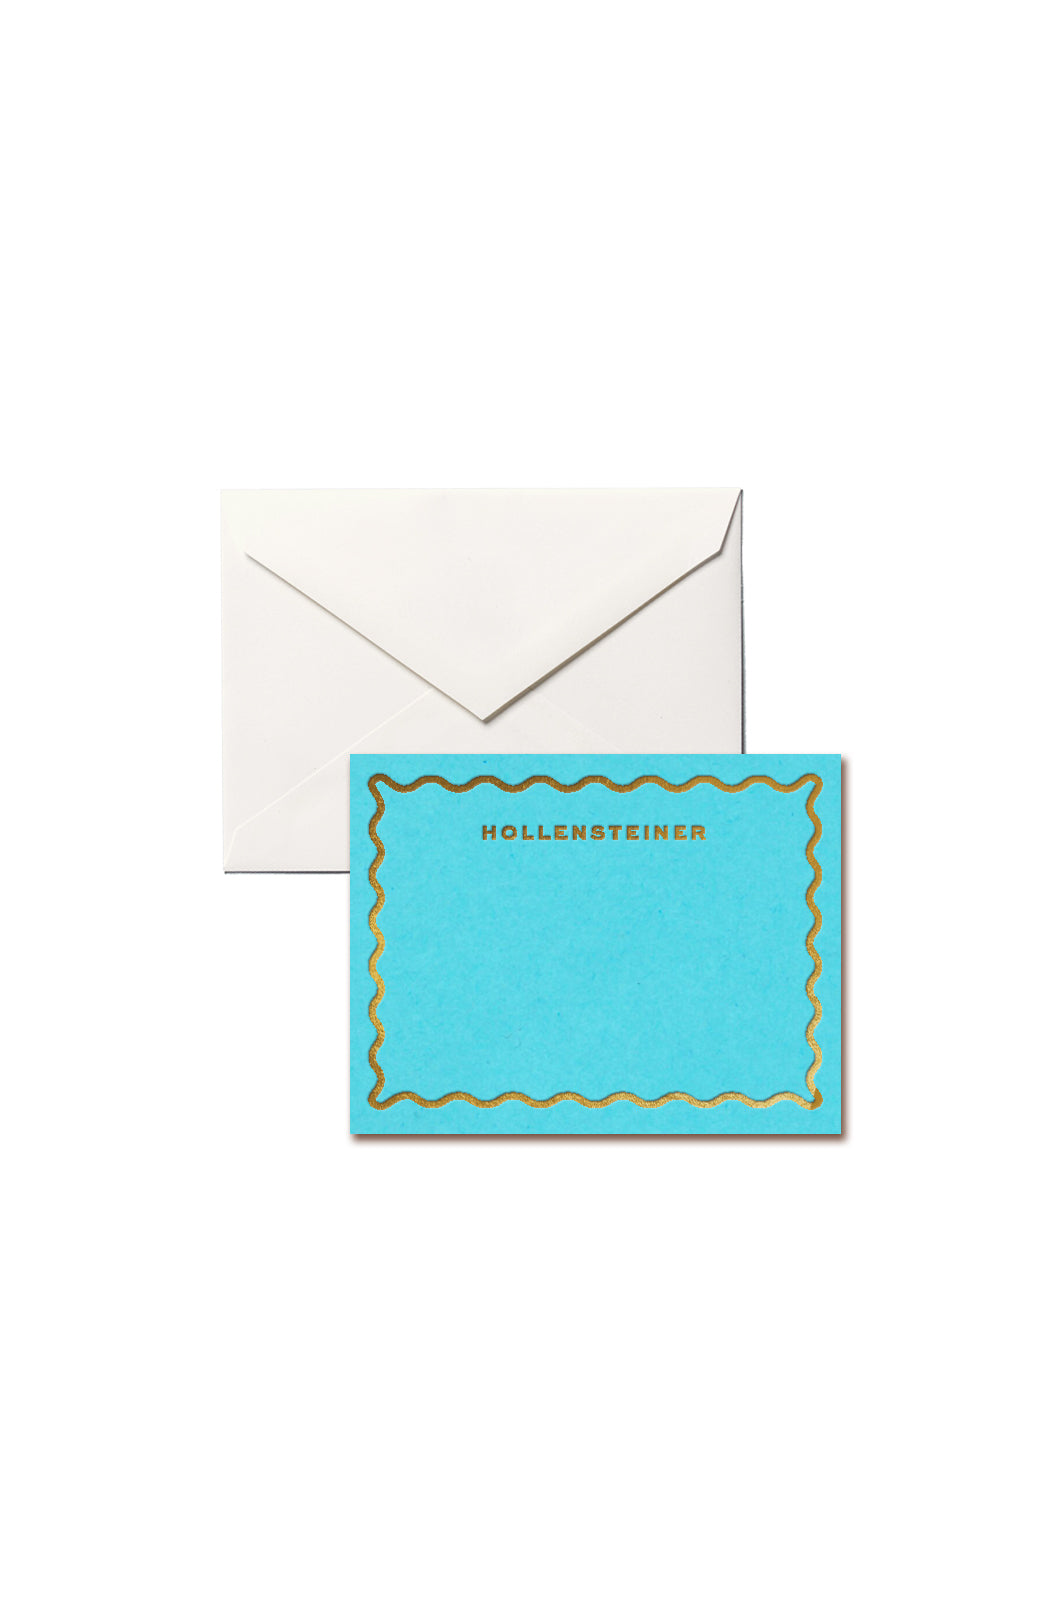 Personalized Gift Enclosure Cards